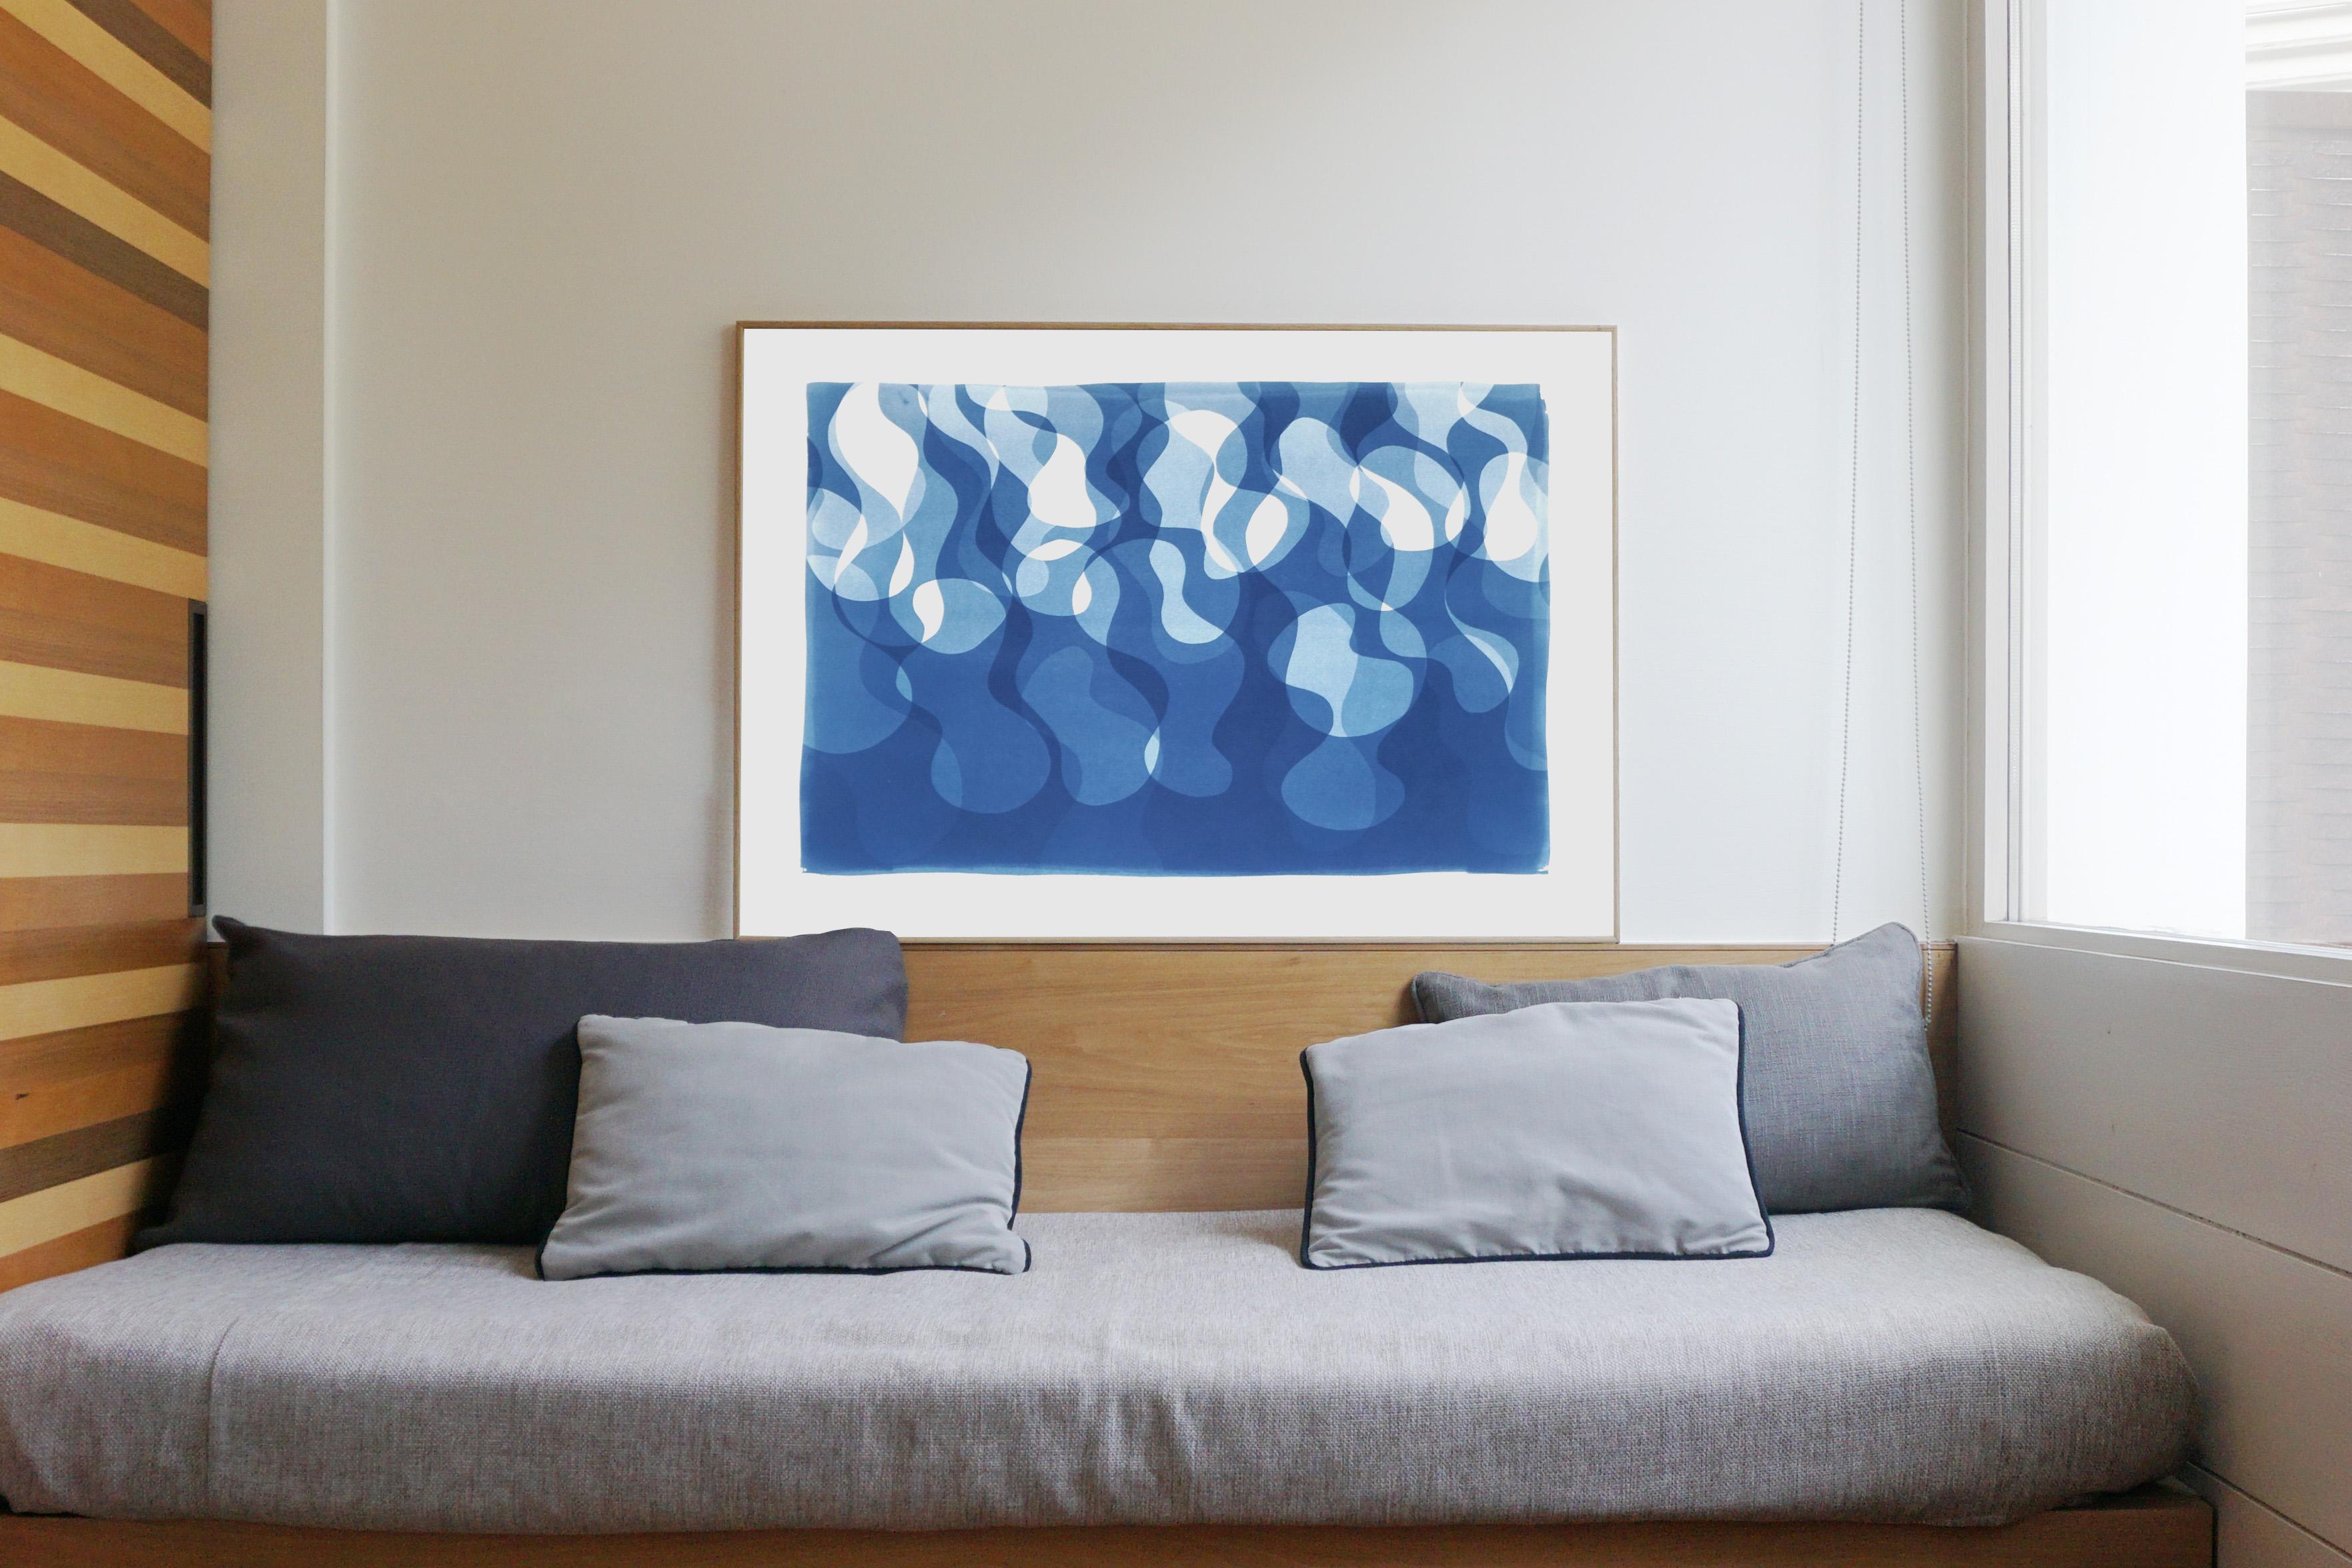 This is an exclusive handprinted unique cyanotype that takes its inspiration from the mid-century modern shapes.
It's made by layering paper cutouts and different exposures using uv-light. 

Details:
+ Title: Curvy Water Flow
+ Year: 2021
+ Stamped